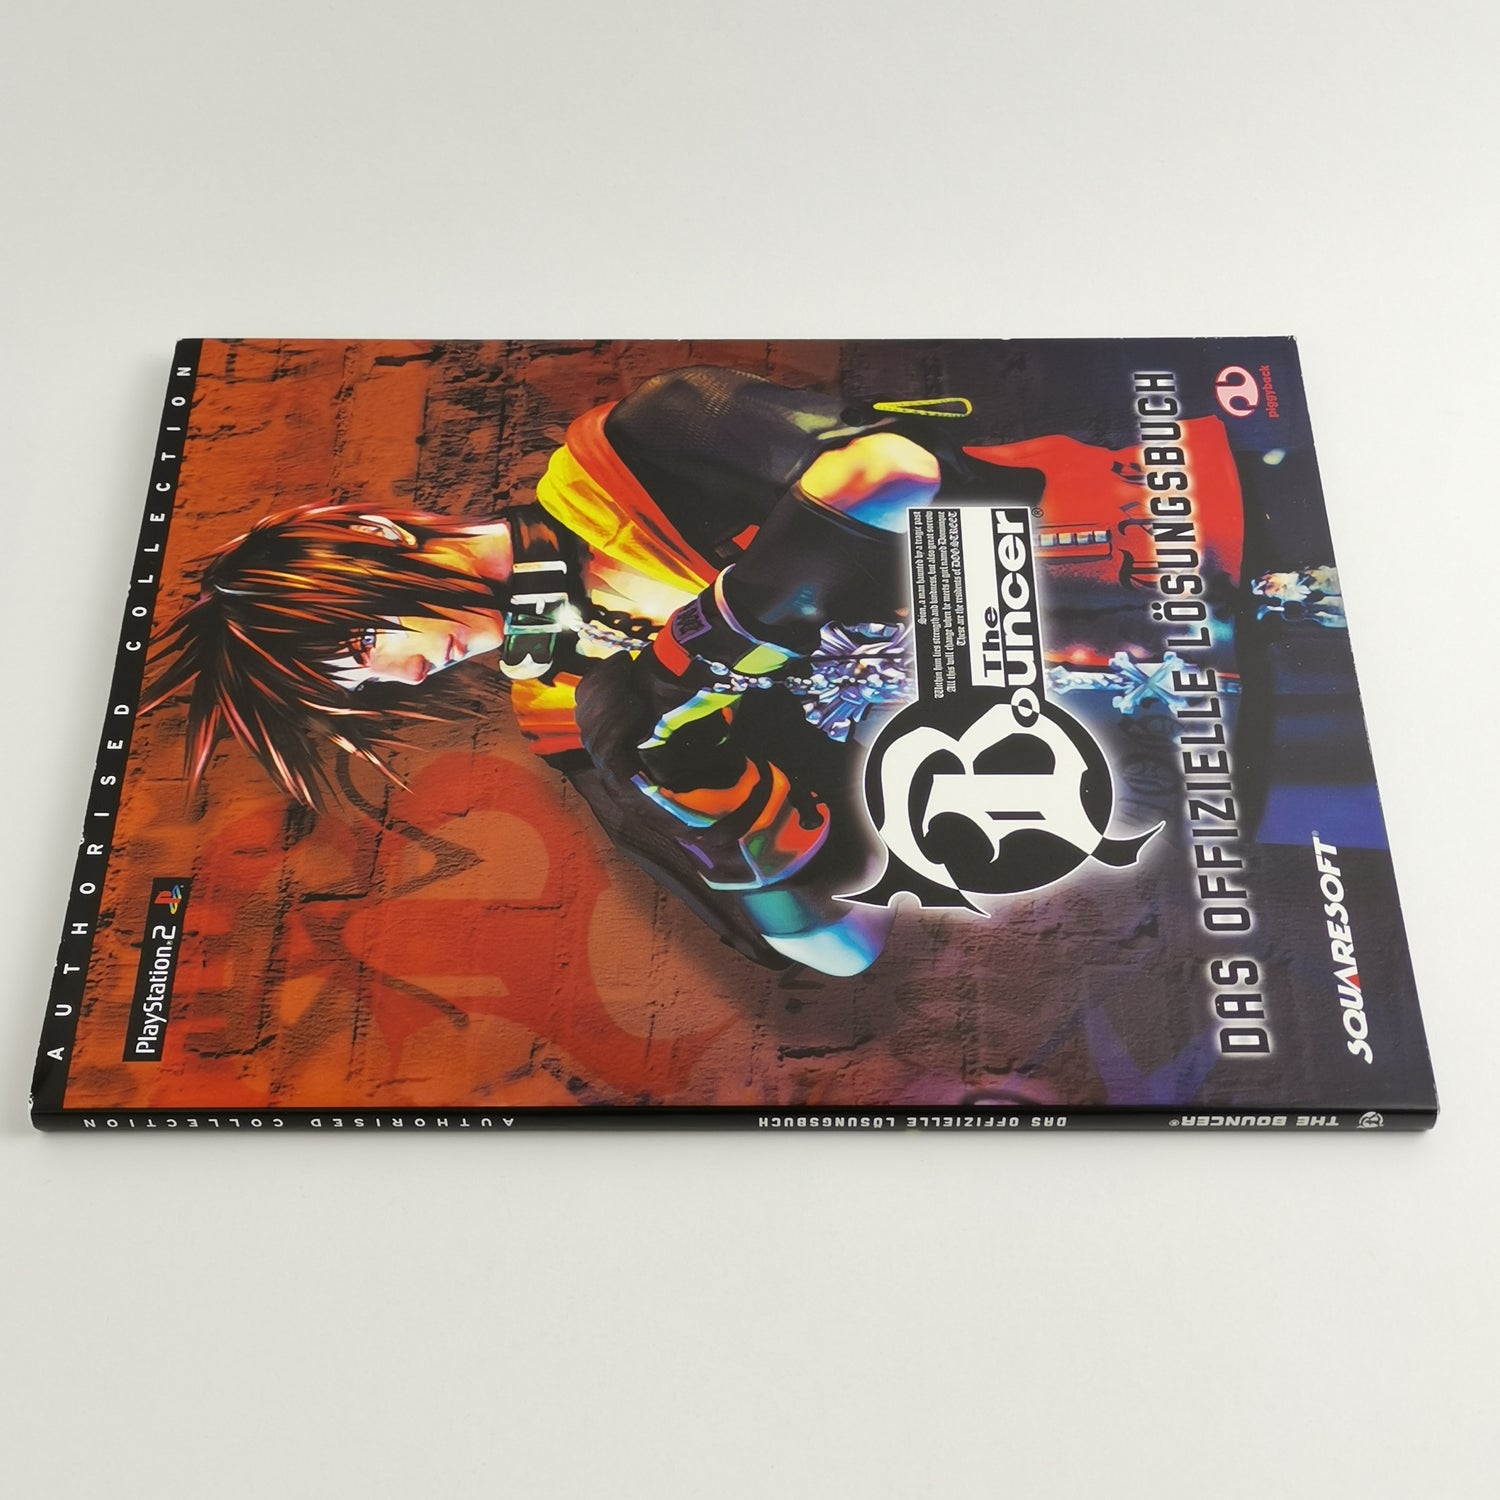 Sony Playstation 2 Game: The Bouncer + Walkthrough Book Guide | PS2 OVP PAL